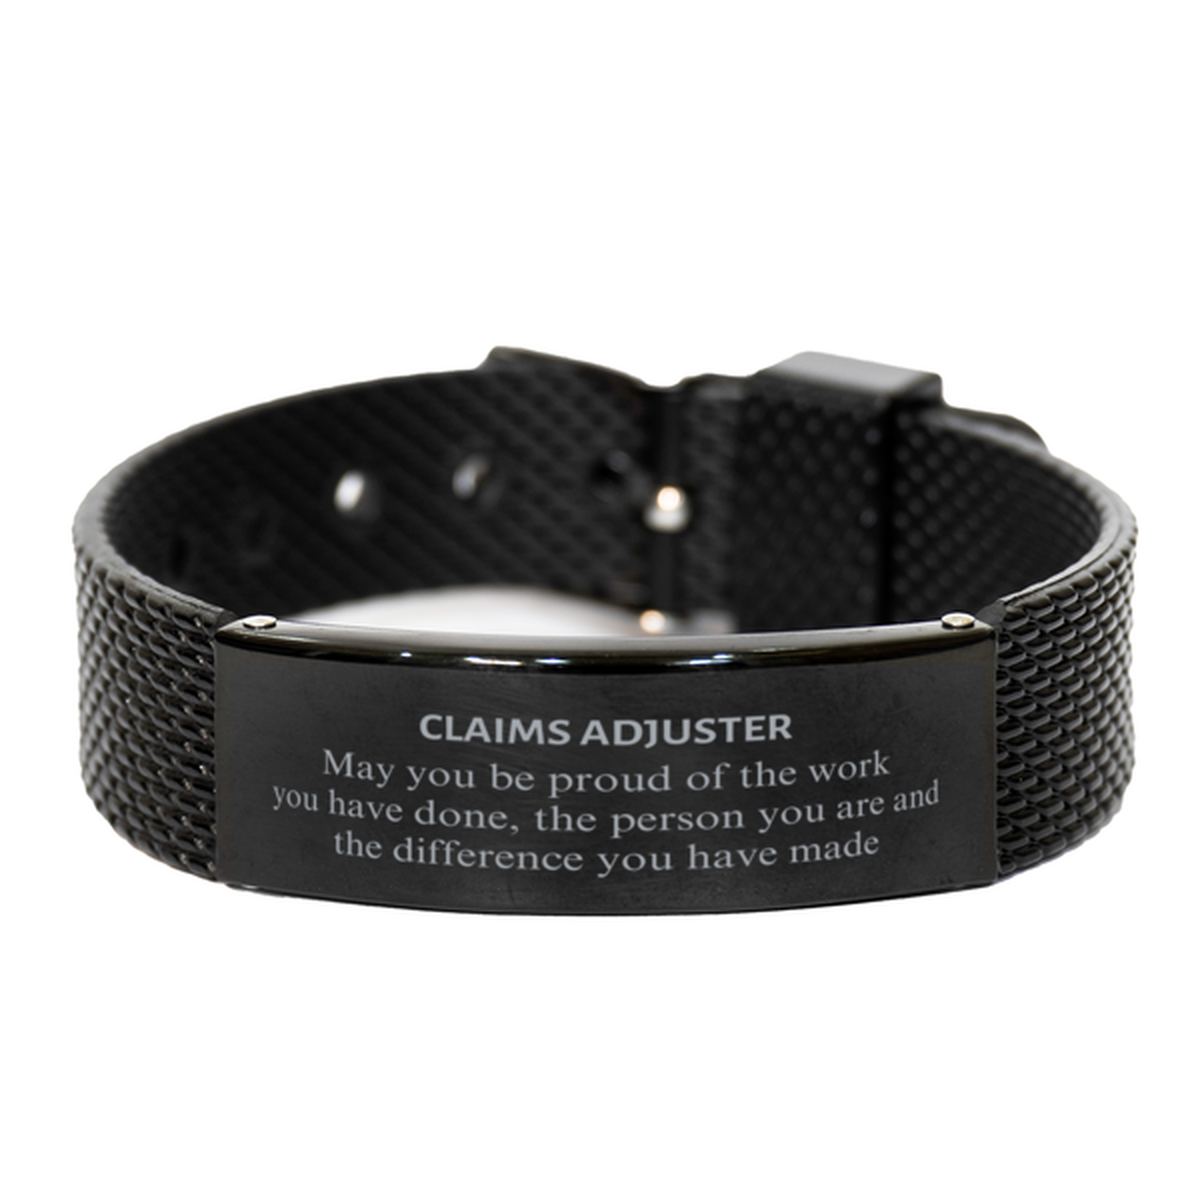 Claims Adjuster May you be proud of the work you have done, Retirement Claims Adjuster Black Shark Mesh Bracelet for Colleague Appreciation Gifts Amazing for Claims Adjuster